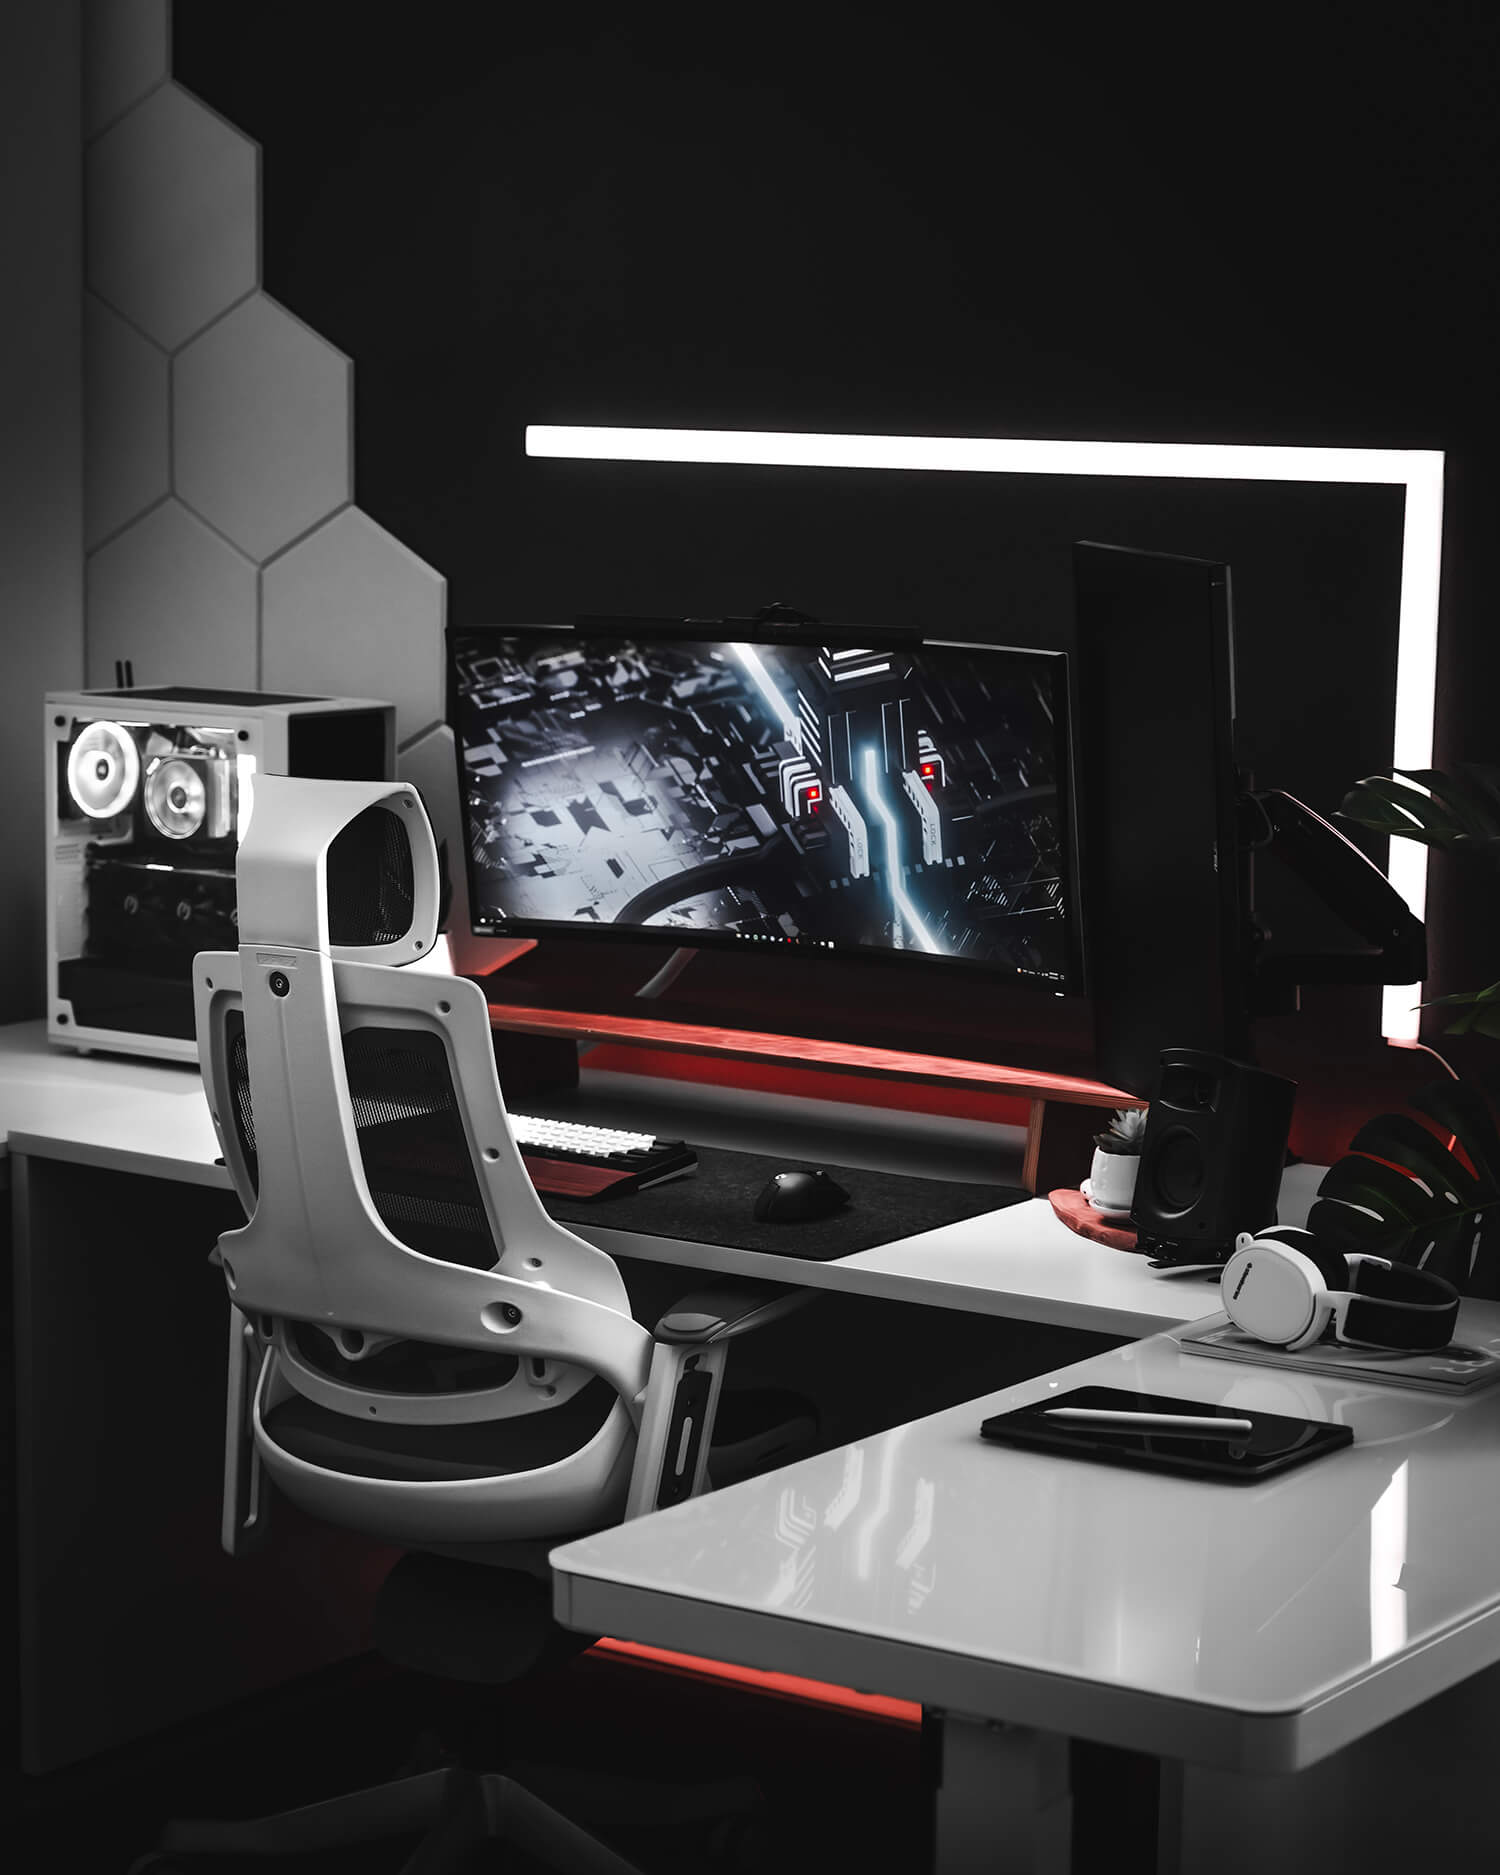 https://www.makerstations.io/content/images/2021/09/jay-futuristic-gaming-setup-04-1.jpg